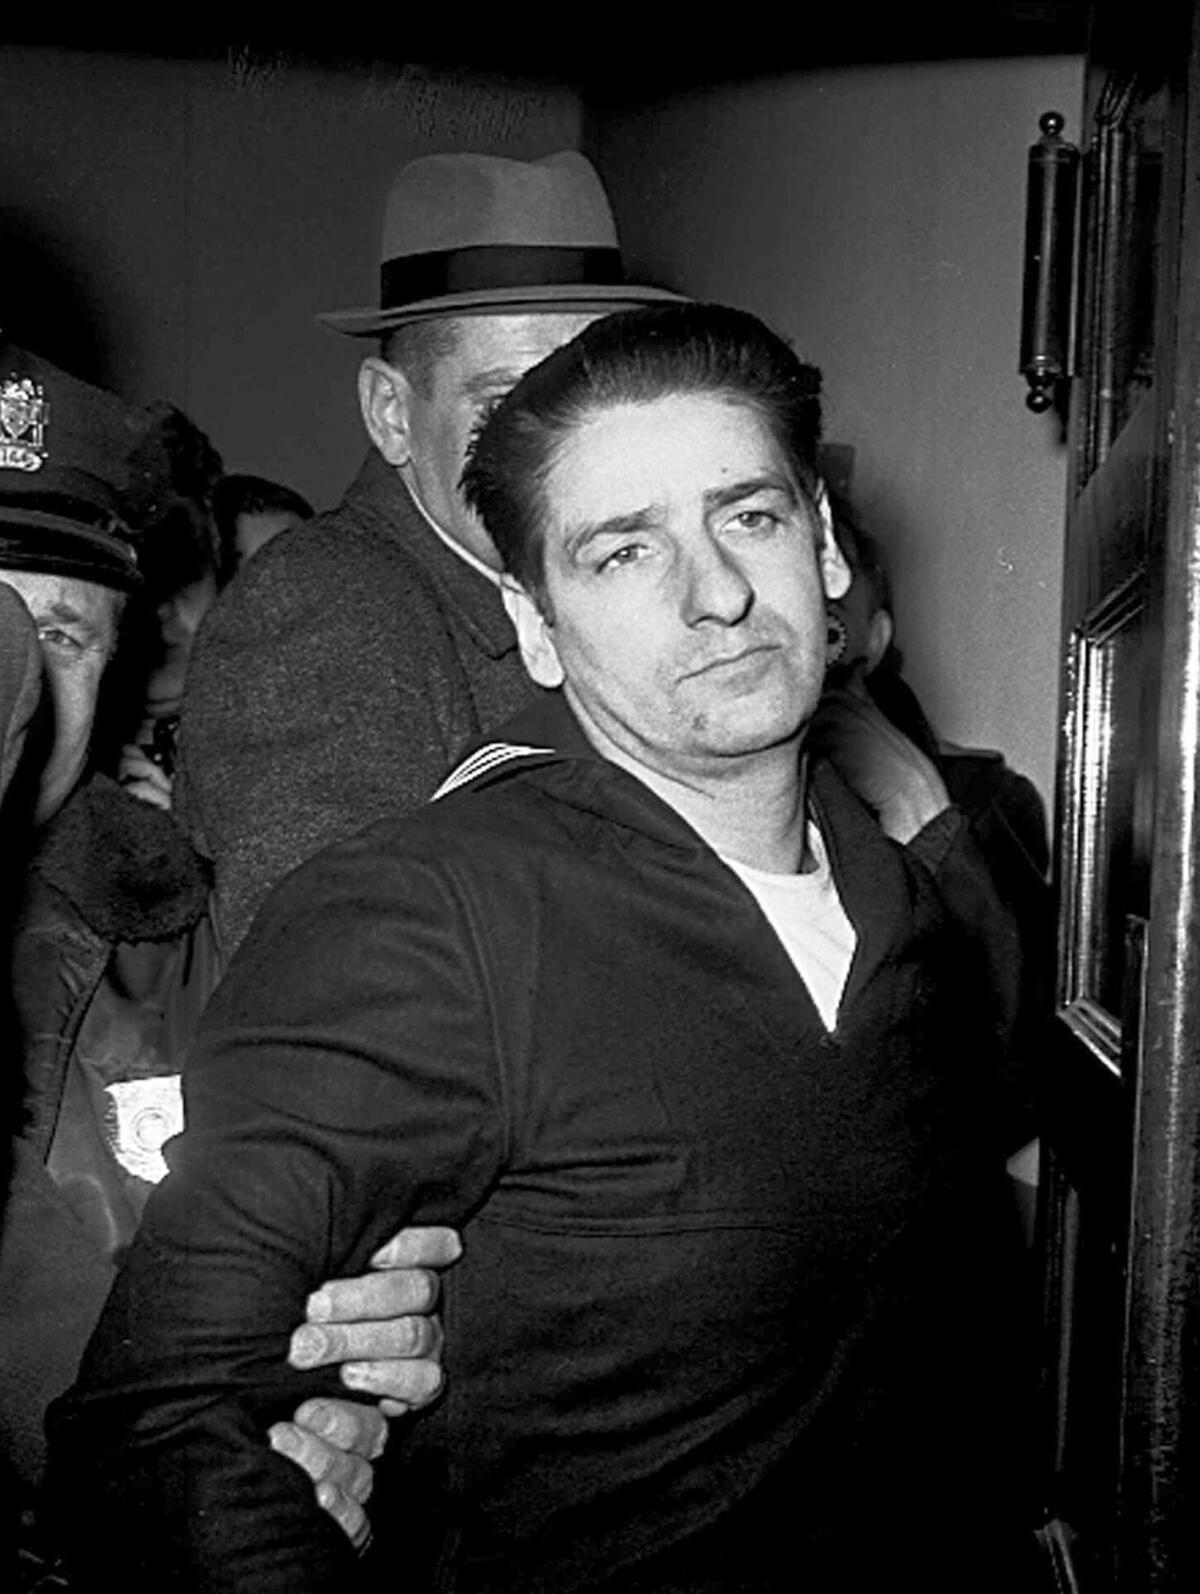 Self-confessed Boston Strangler Albert DeSalvo is seen minutes after his capture in Boston in 1967. Authorities say DNA tests on the remains of DeSalvo confirm he killed Mary Sullivan, the woman believed to be the serial killer's last victim.